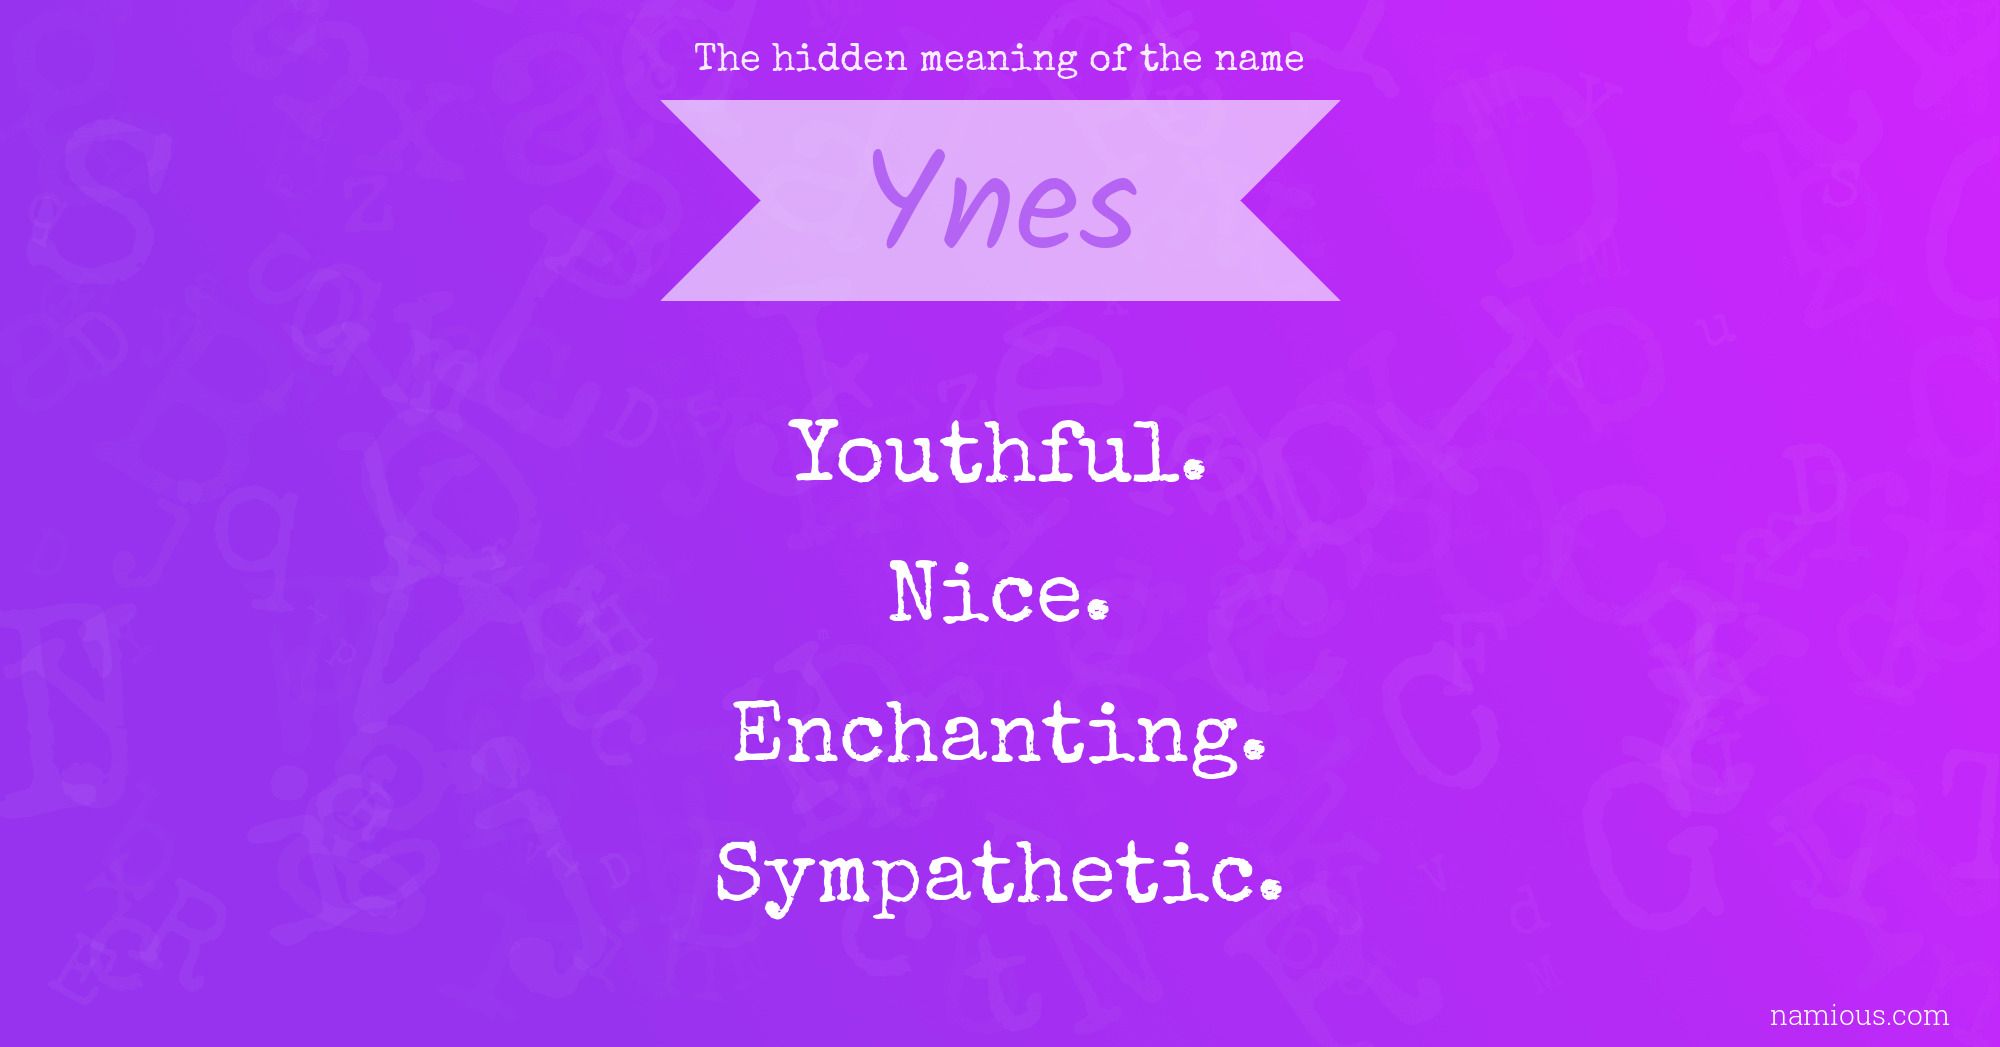 The hidden meaning of the name Ynes